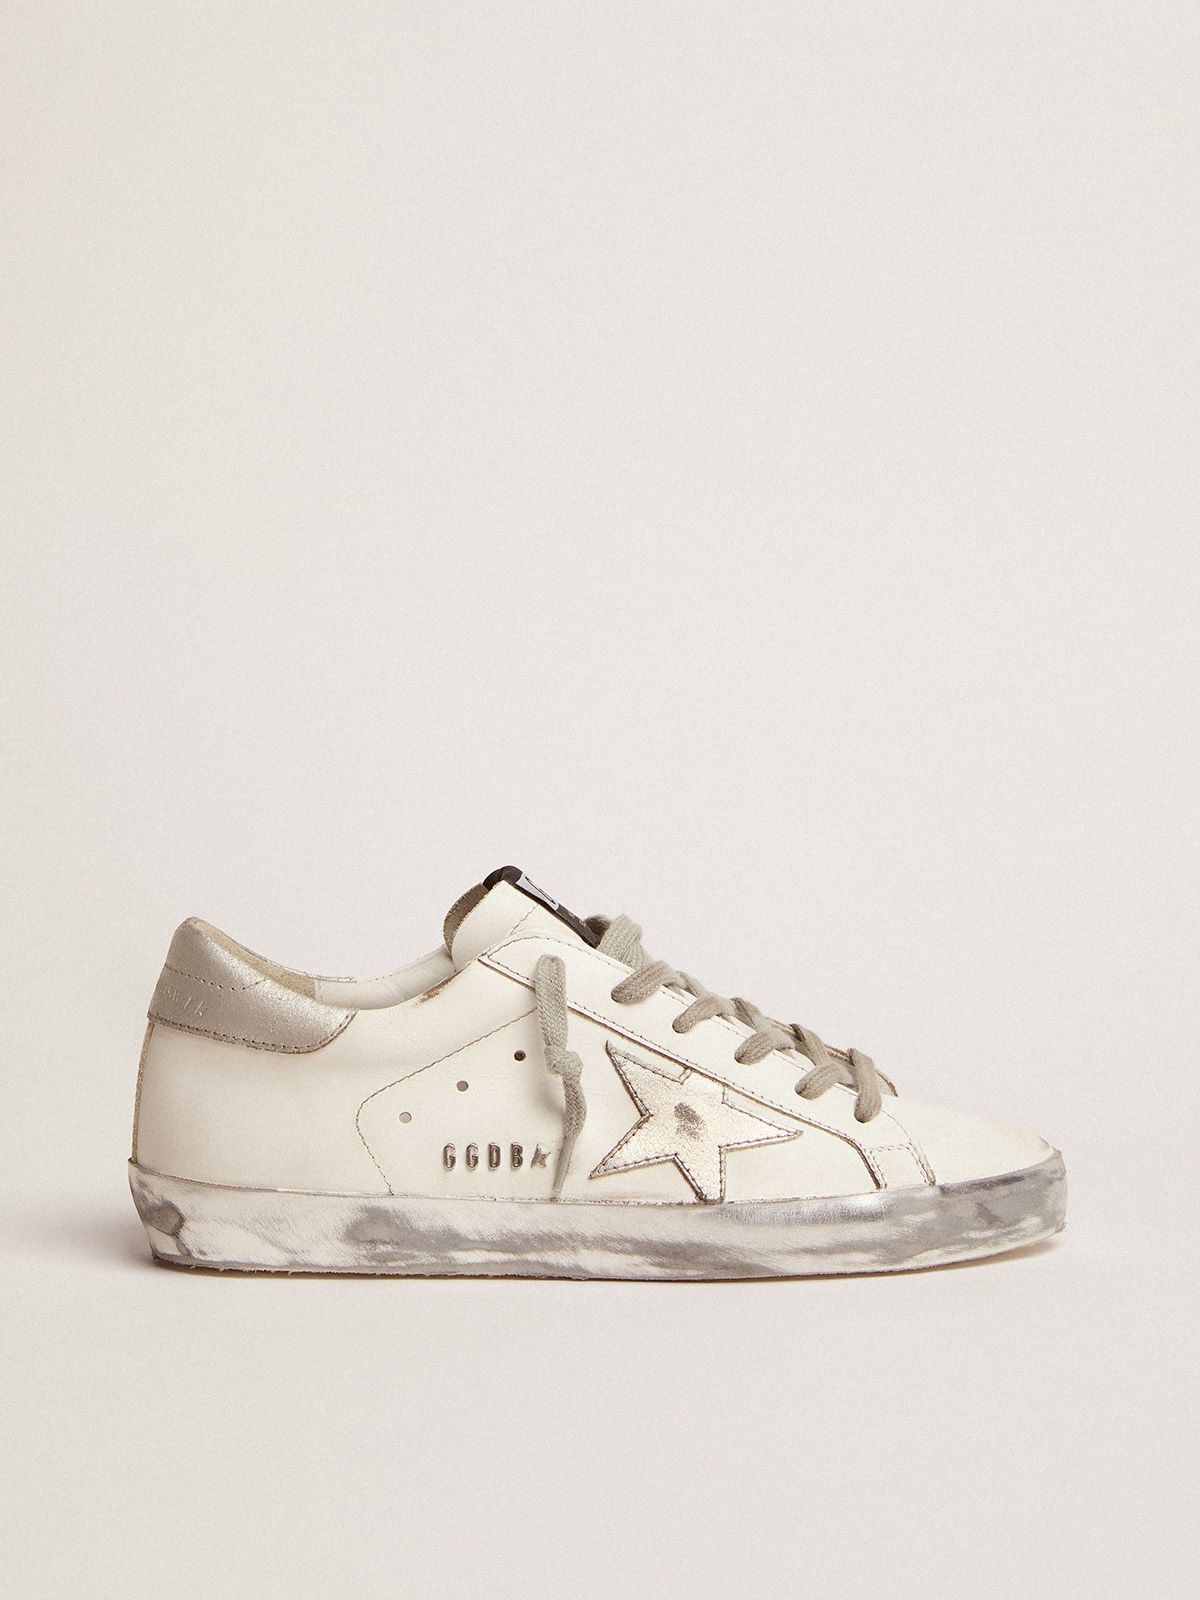 golden goose with foxing sneakers silver metal lettering Super-Star and sparkle stud